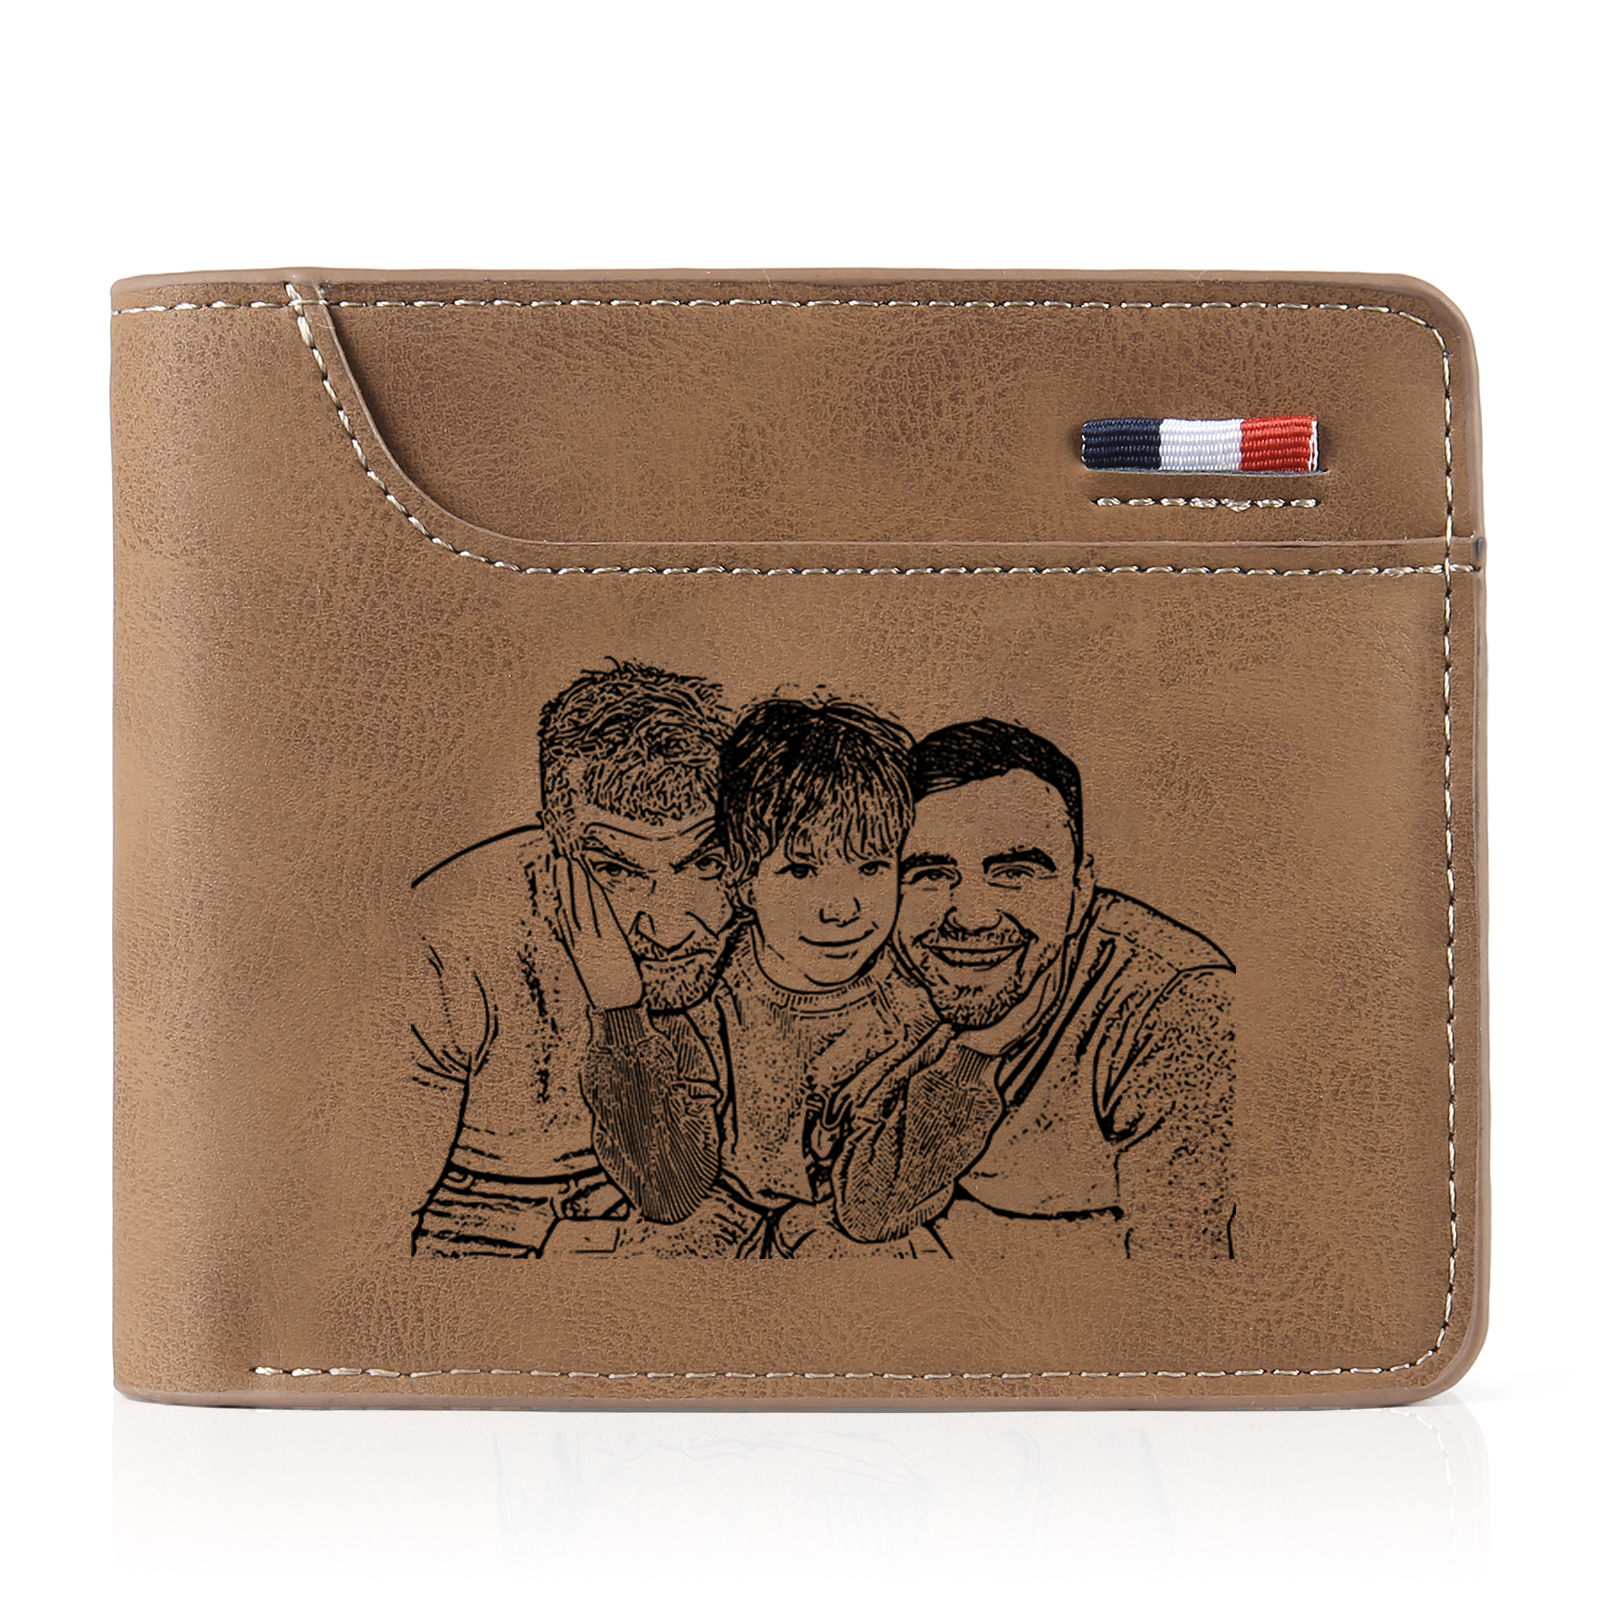 3-Names Personalized Leather Men's wallet With Card Slot Engraved With Name And Photo For Papa As a Father's Day Unique Gift